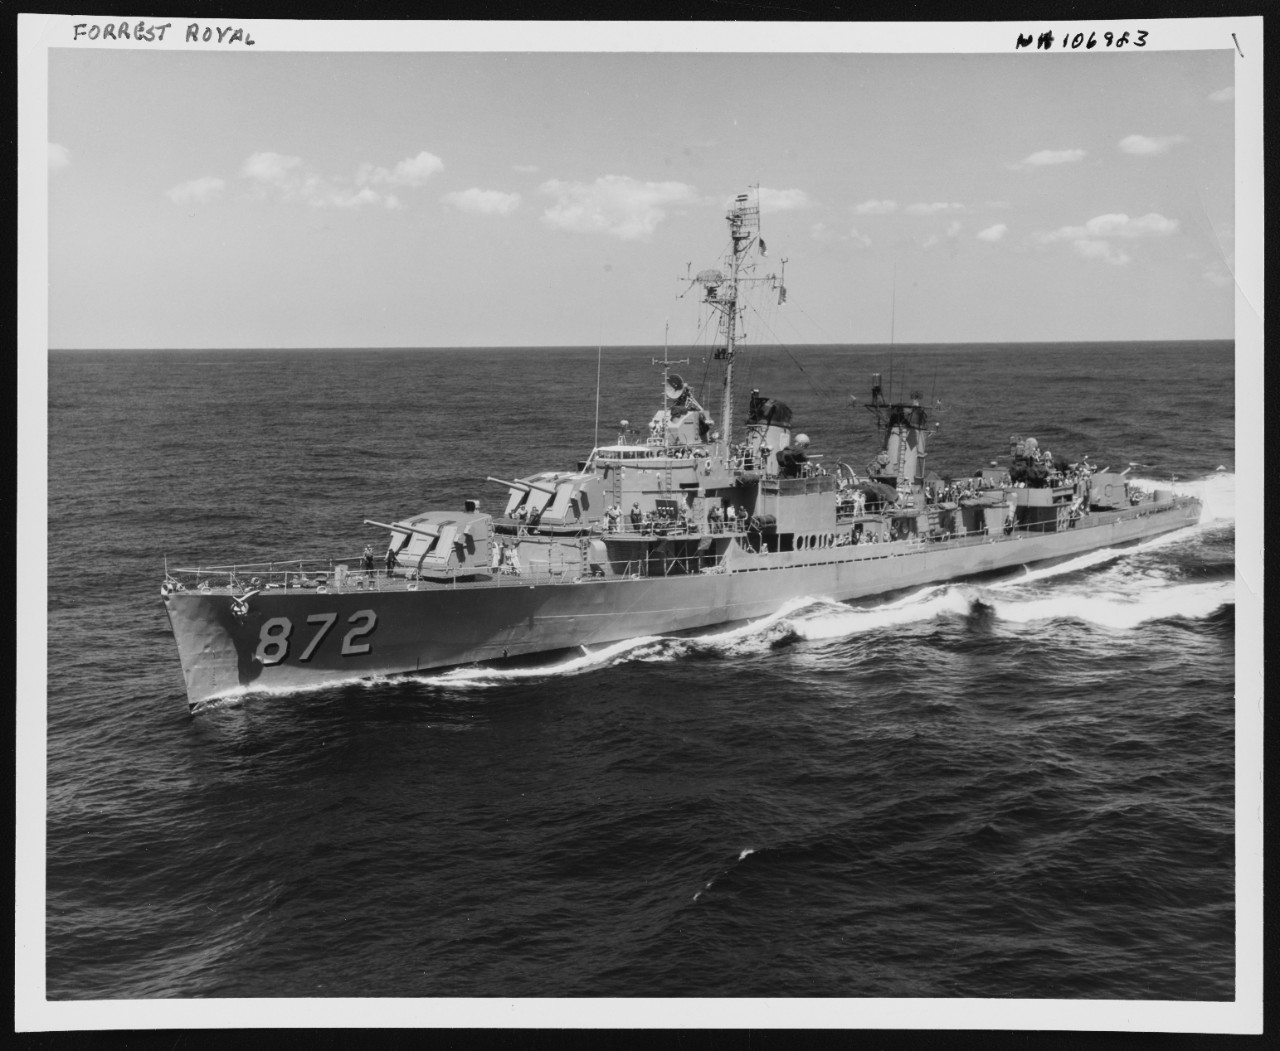 Photo # NH 106983  USS Forrest Royal